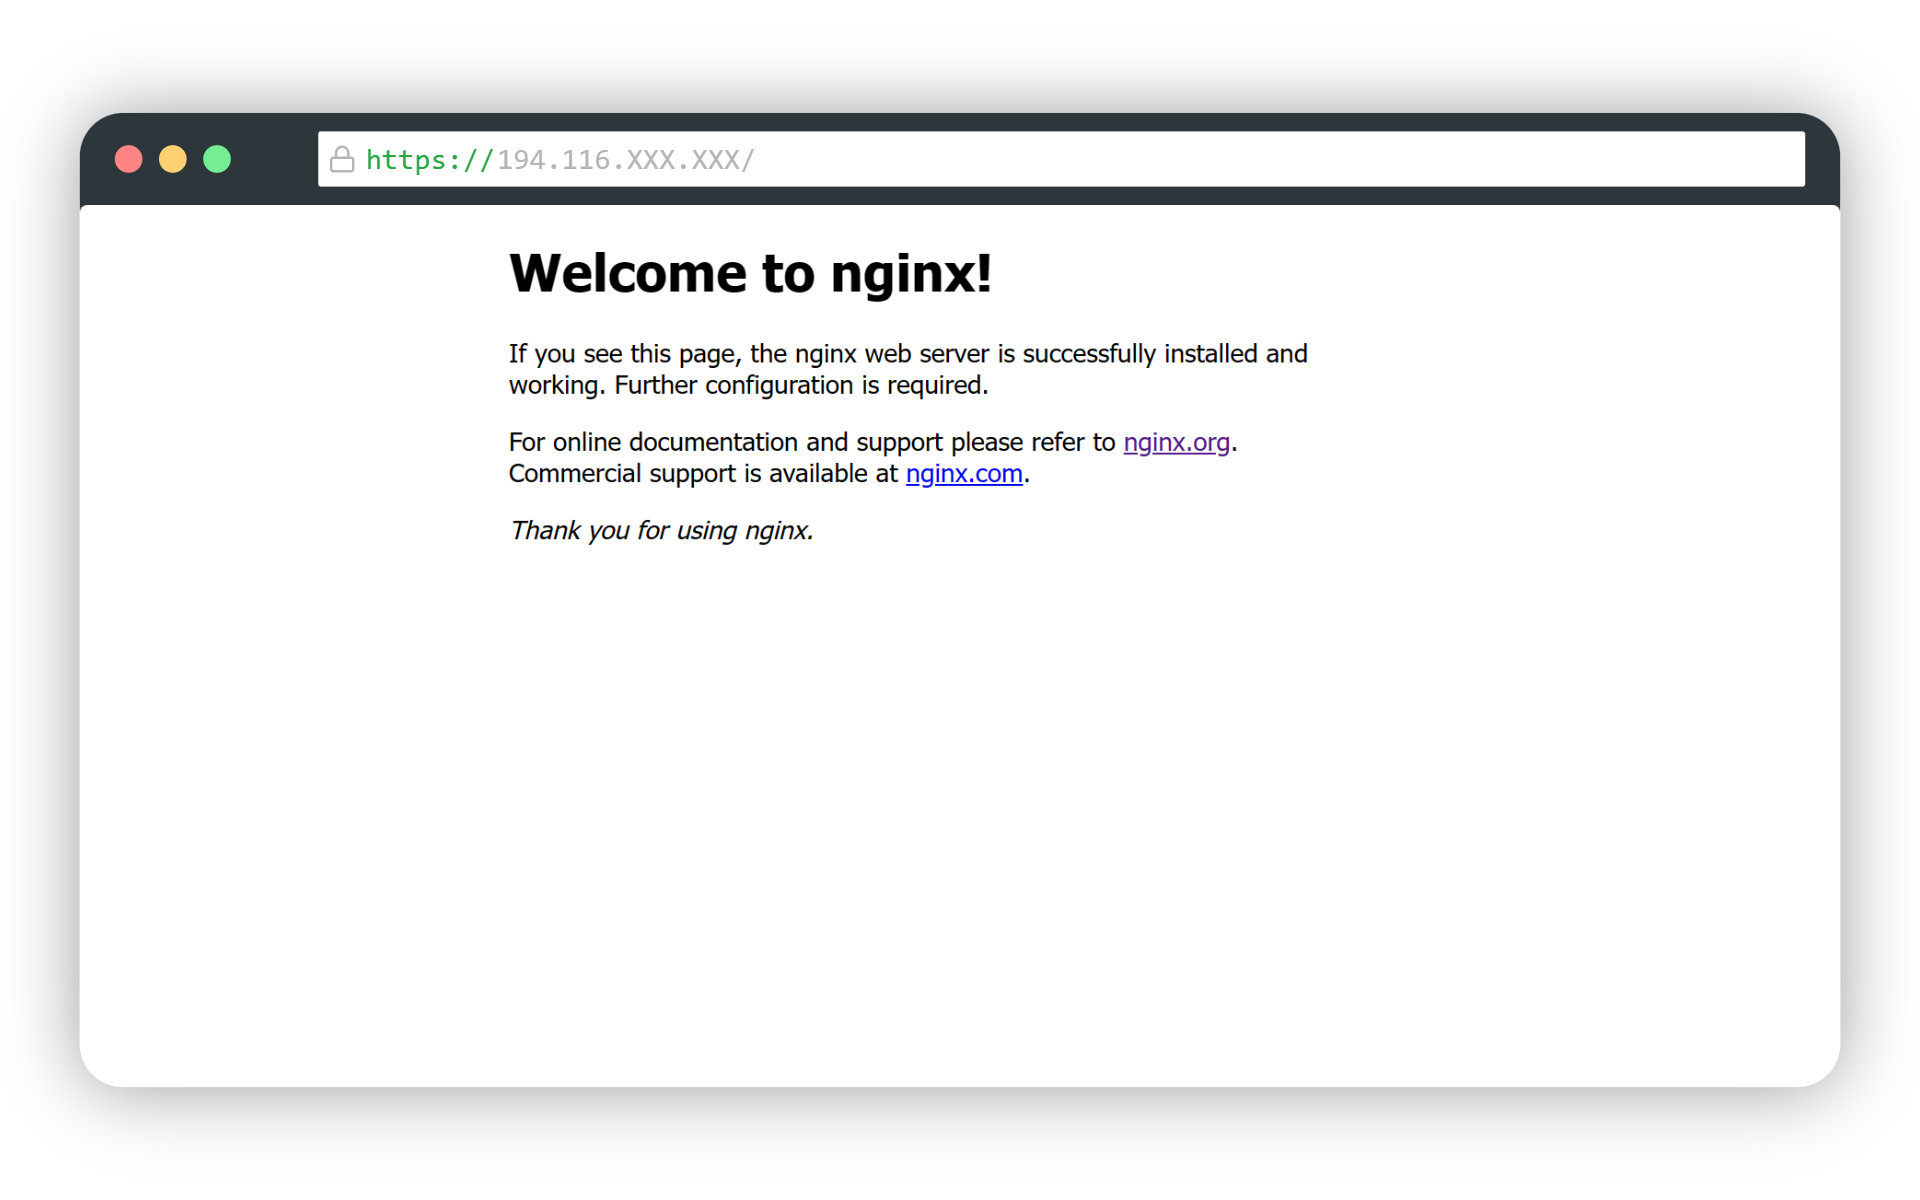 Mastering NGINX with IPinfo for Access Control and Privacy Policies